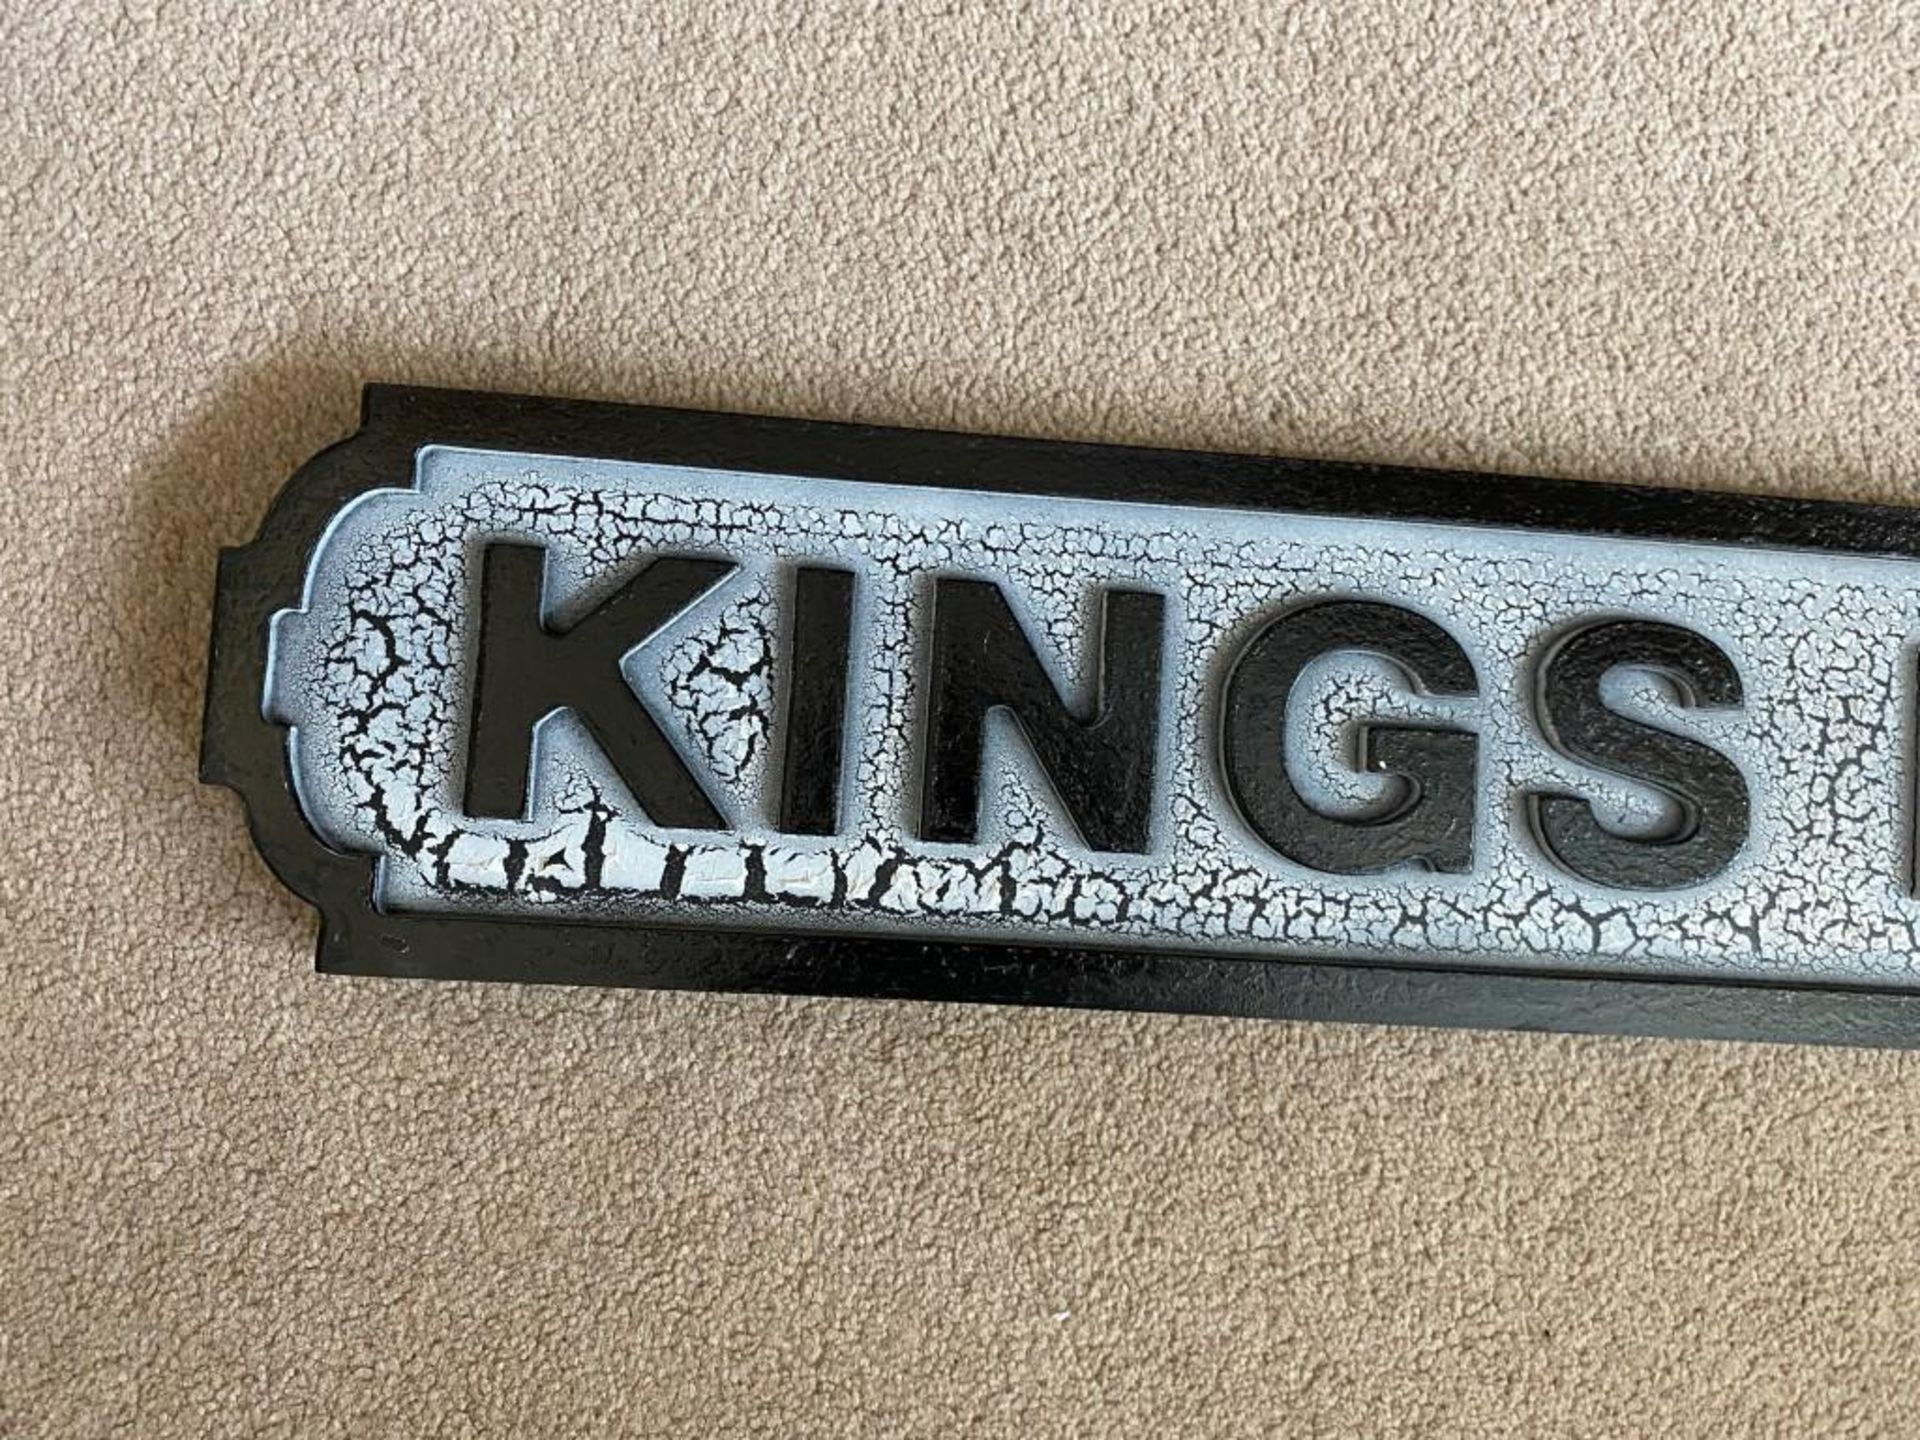 A WOODEN KINGS ROAD STREET SIGN, LENGTH 80 CM - Image 2 of 4